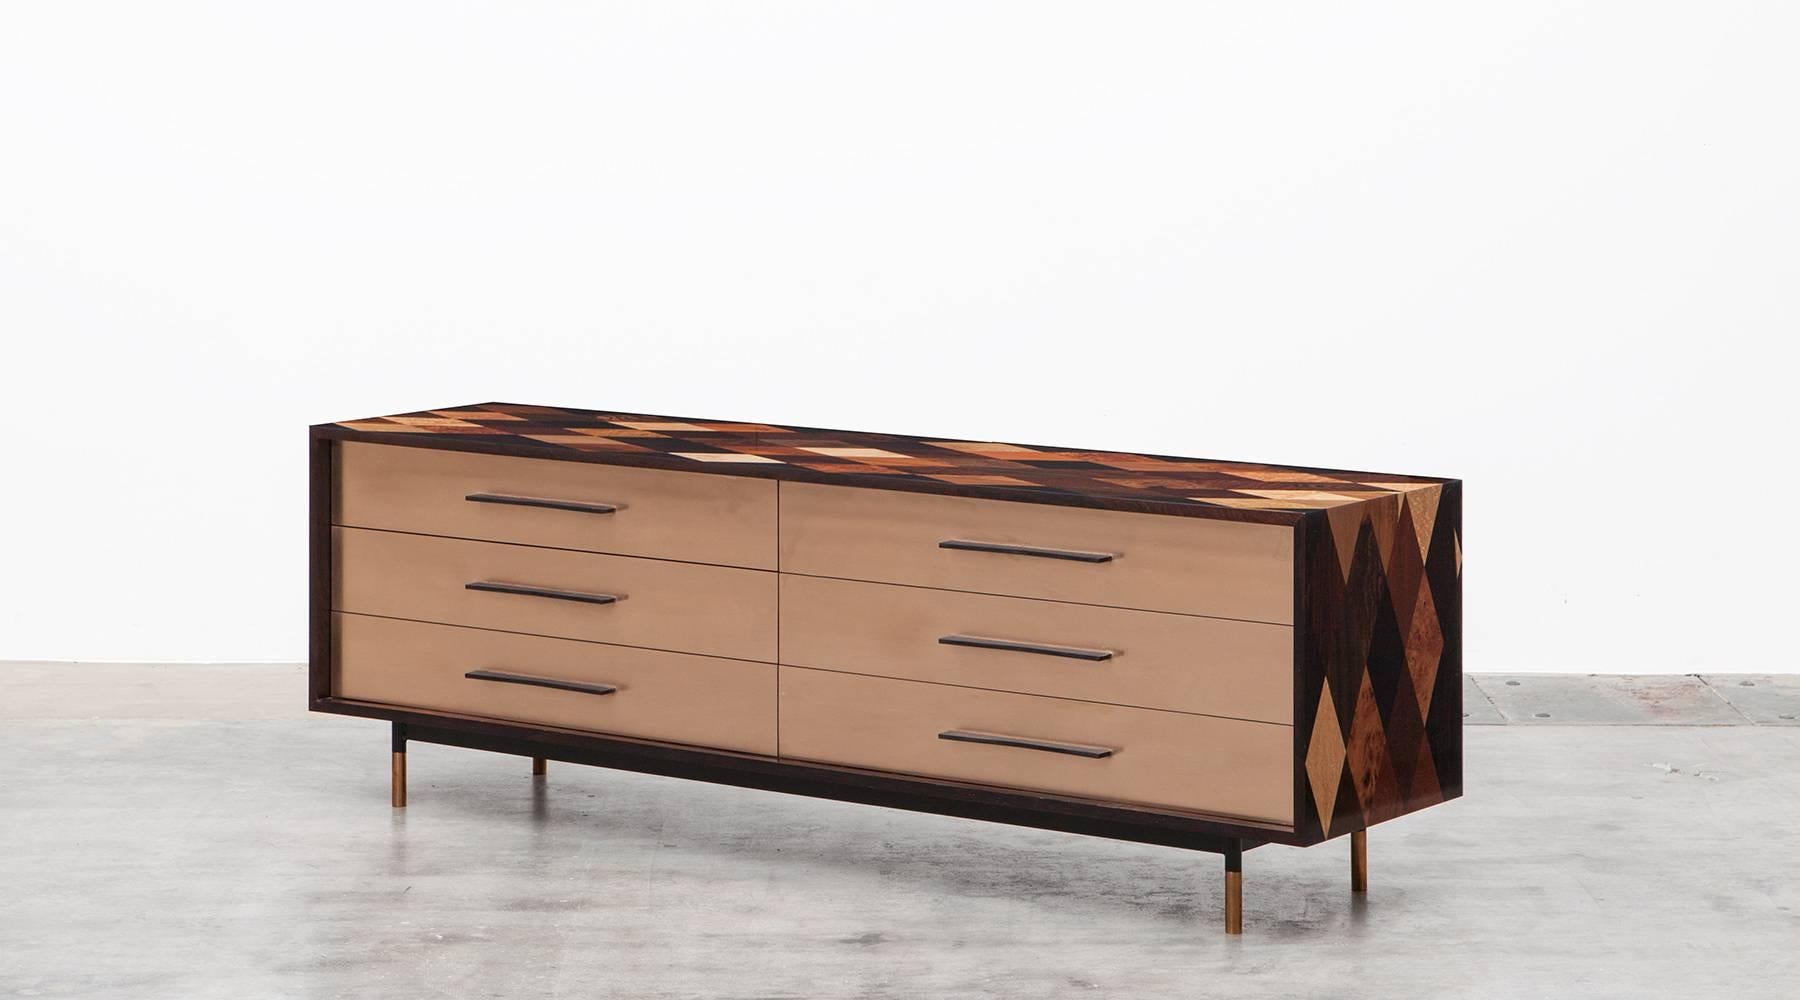 Sideboard by contemporary German artist Johannes Hock. The corpus comes in veneered tabletop in diamond pattern, used by 30 types of wood. The drawer front is bronze and contains six of it. Manufactured by Atelier Johannes Hock.

Hock learned